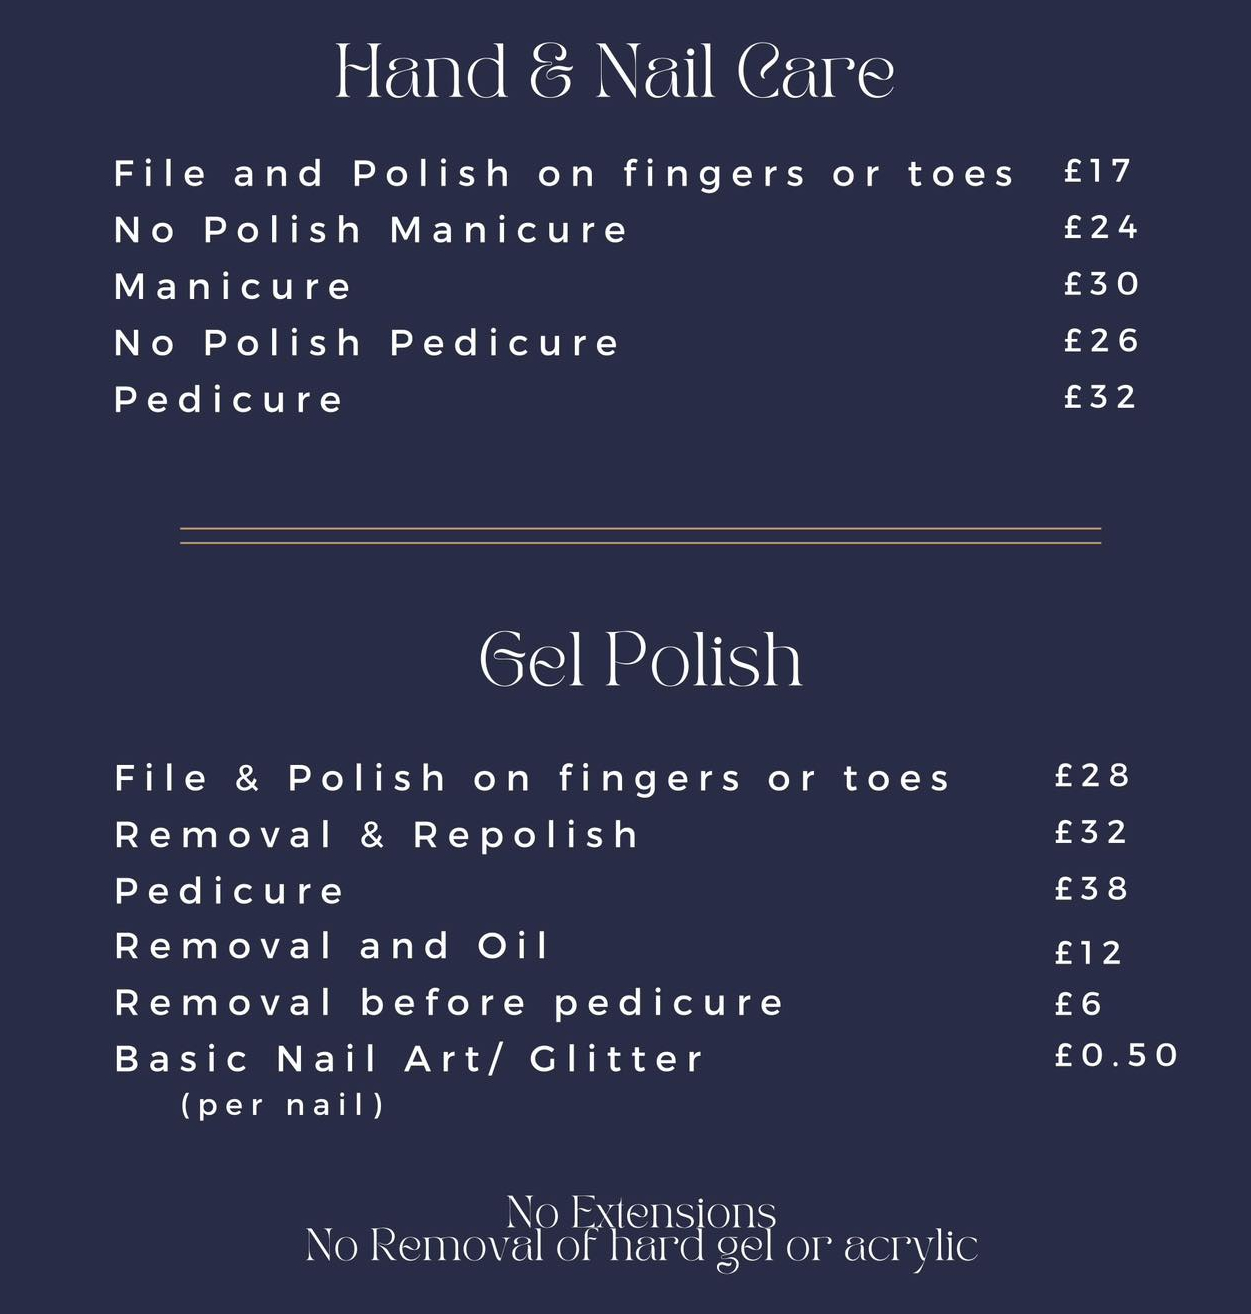 hand-nail-care-prices